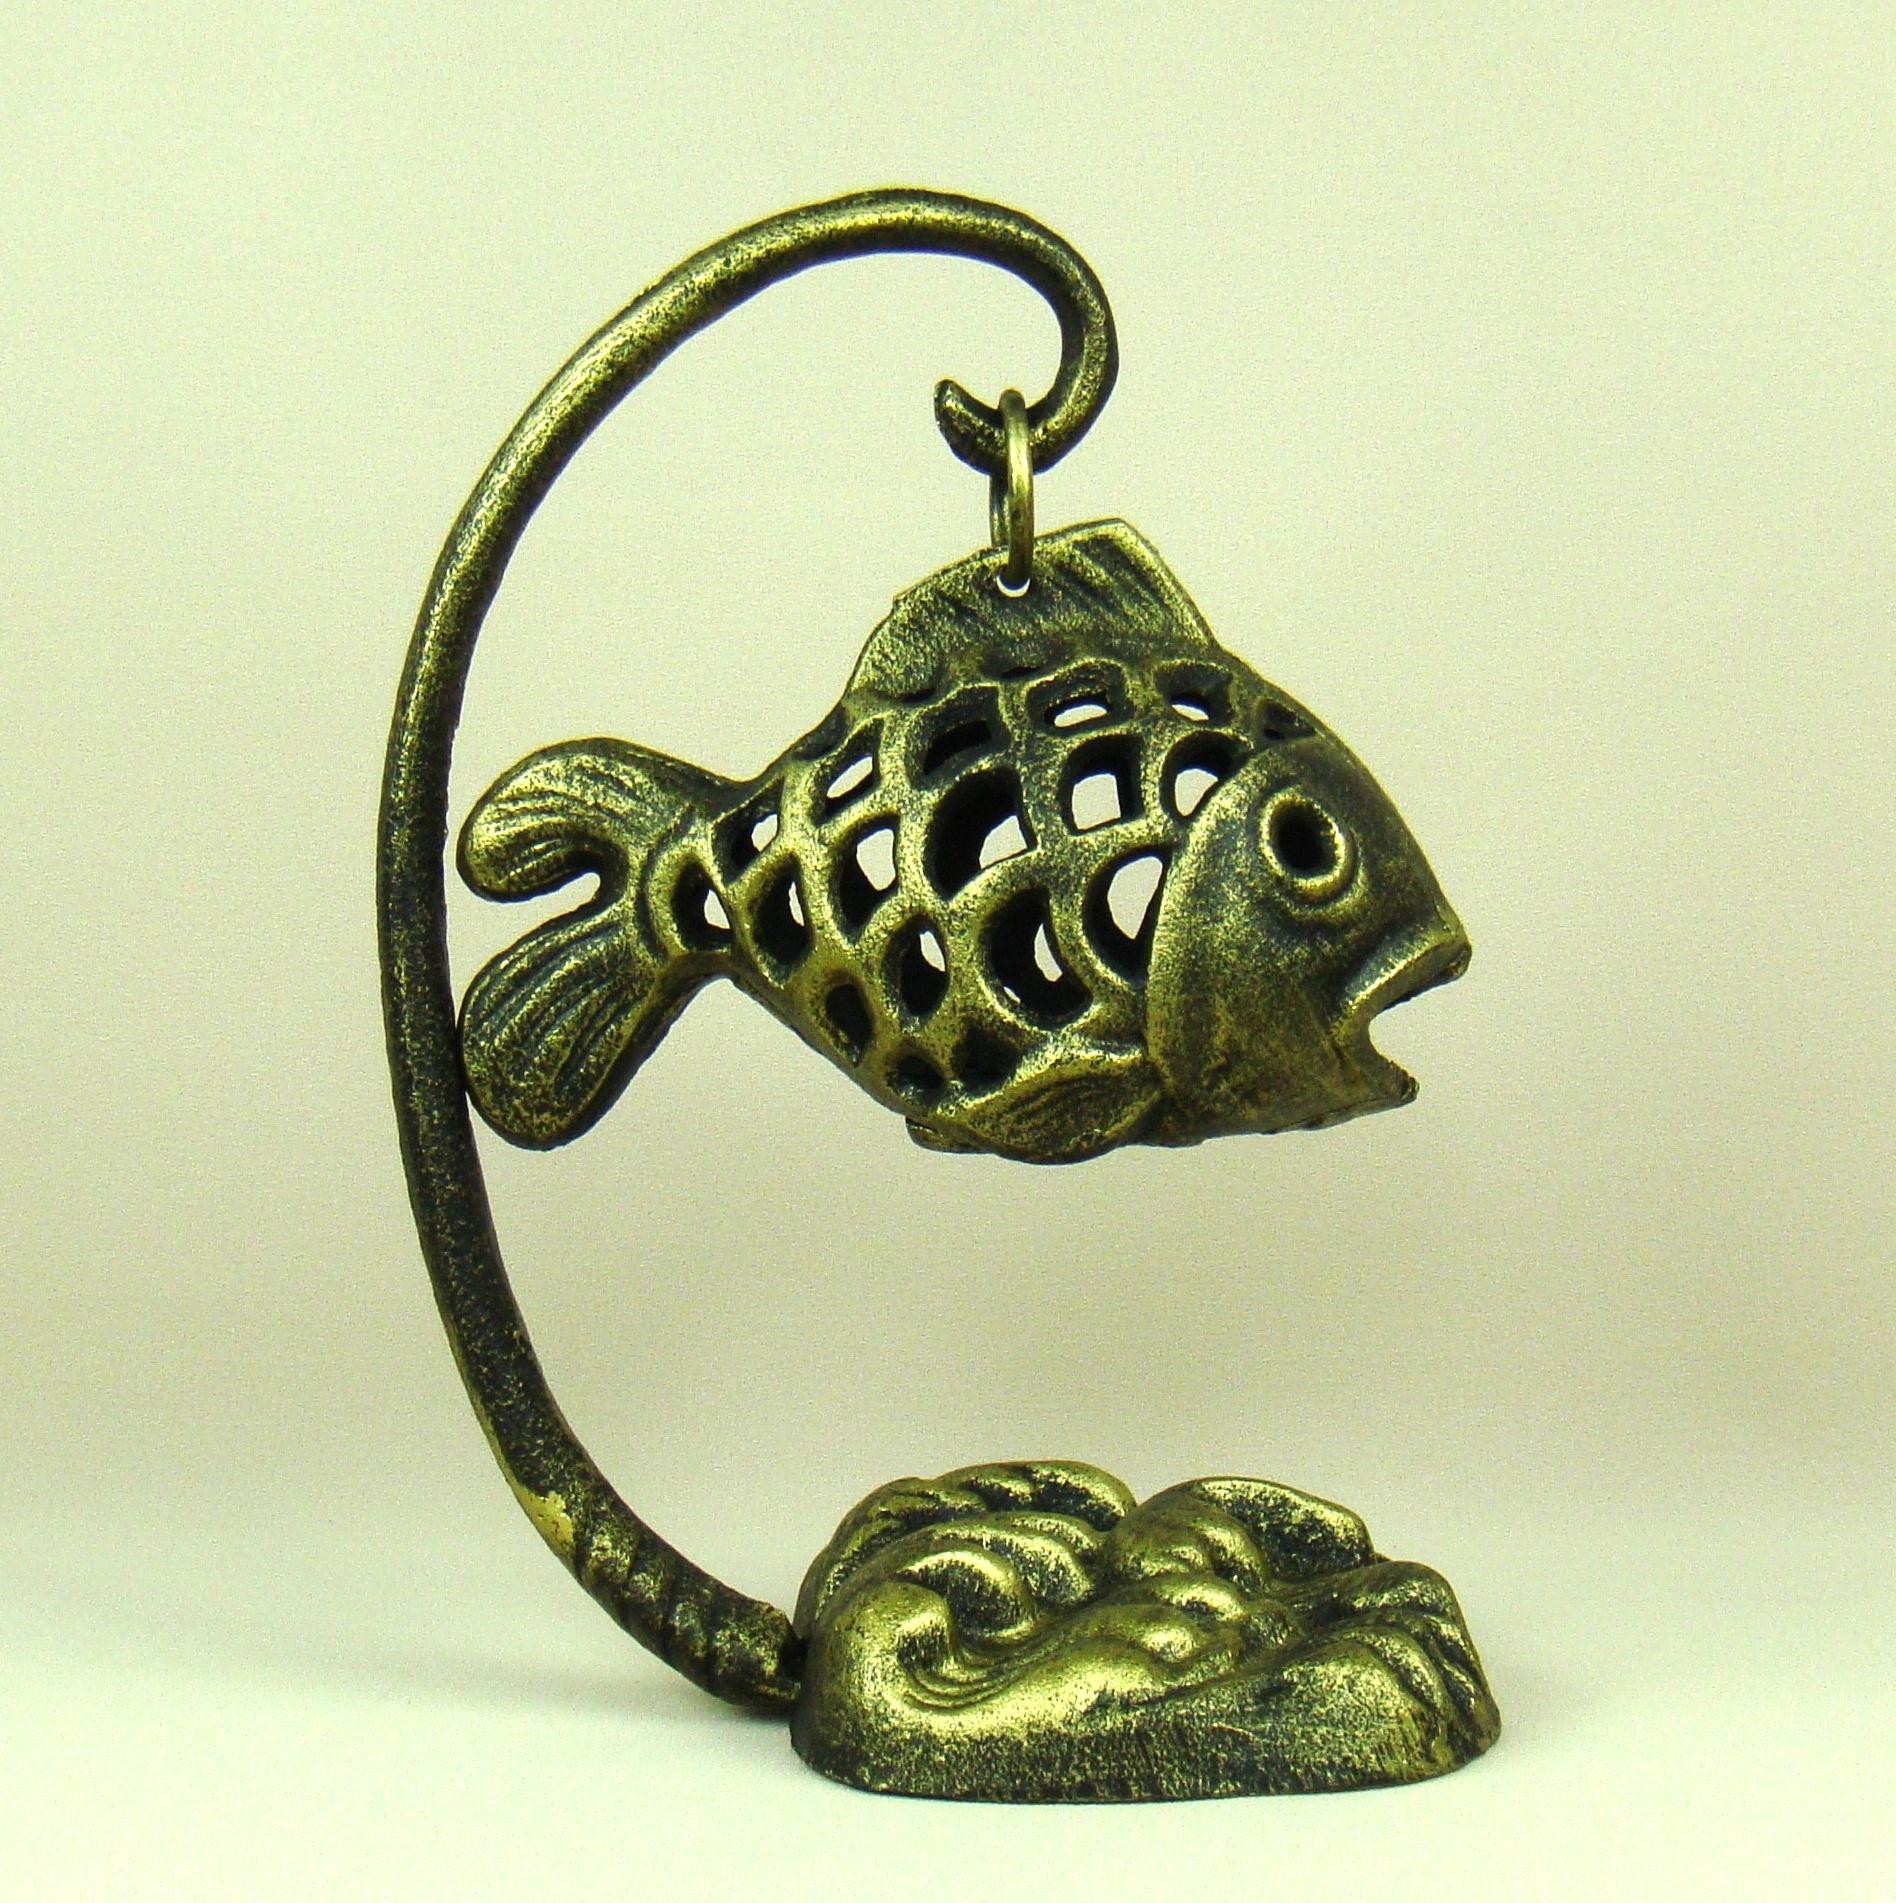 16 Awesome Metal Vases wholesale 2024 free download metal vases wholesale of candle stands wholesale superb creative cast iron fish candle holder within candle stands wholesale superb creative cast iron fish candle holder hanging metal hollow